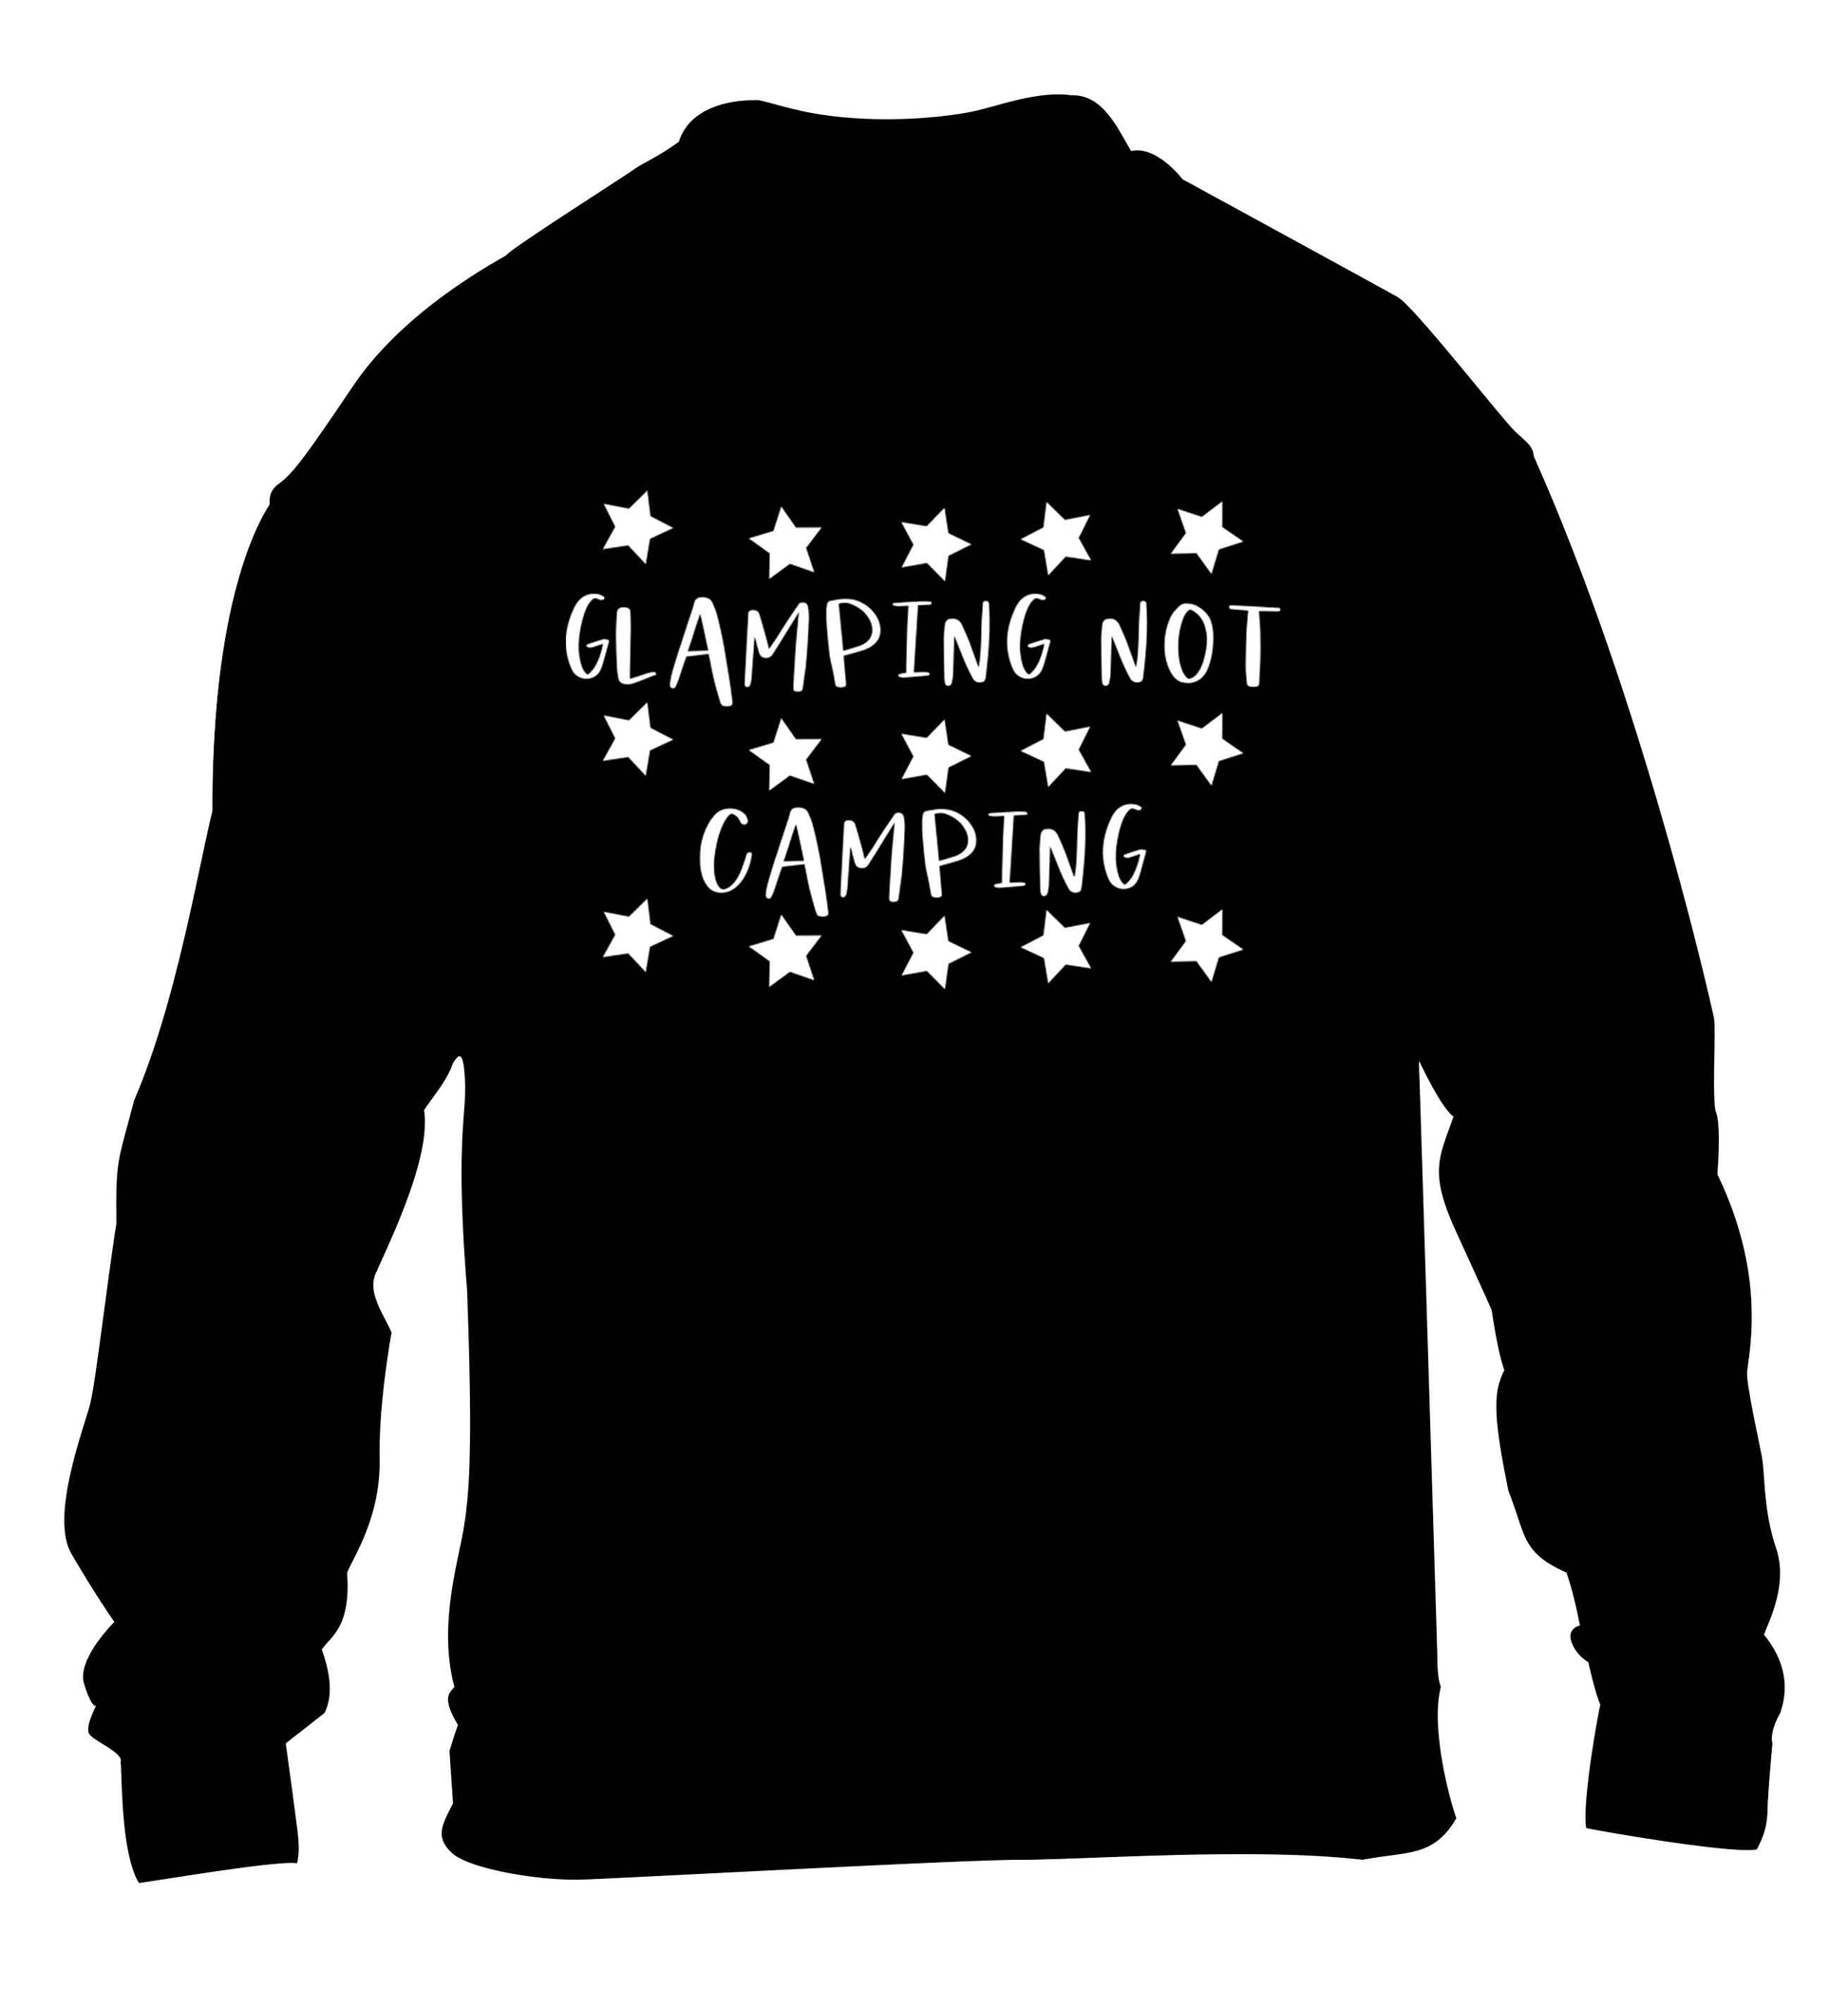 Glamping not camping children's black sweater 12-13 Years